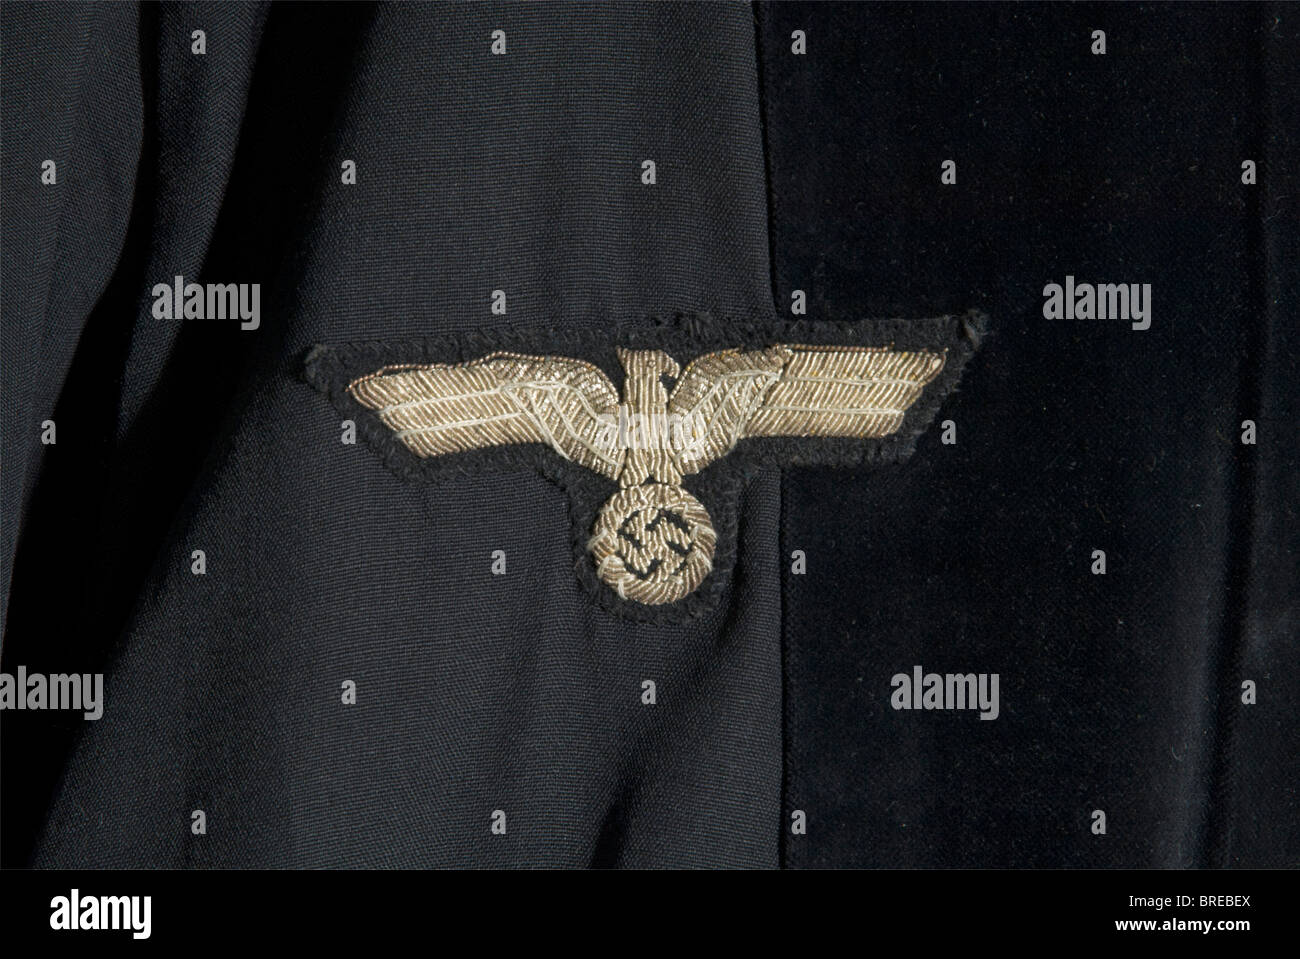 An official robe, for a judge or prosecutor Black cotton with velvet trim and a party eagle embroidered in silver on the right side of the chest. Black covered buttons. A cloth label sewn in, 'Amtstrachten (official robes) Hermann Beck, Berlin S. 42 Dresdenerstr. 127'. Worn, a few mendings. historic, historical, 1930s, 1930s, 20th century, uniform, uniforms, piece of clothing, clothes, outfit, outfits, Stock Photo